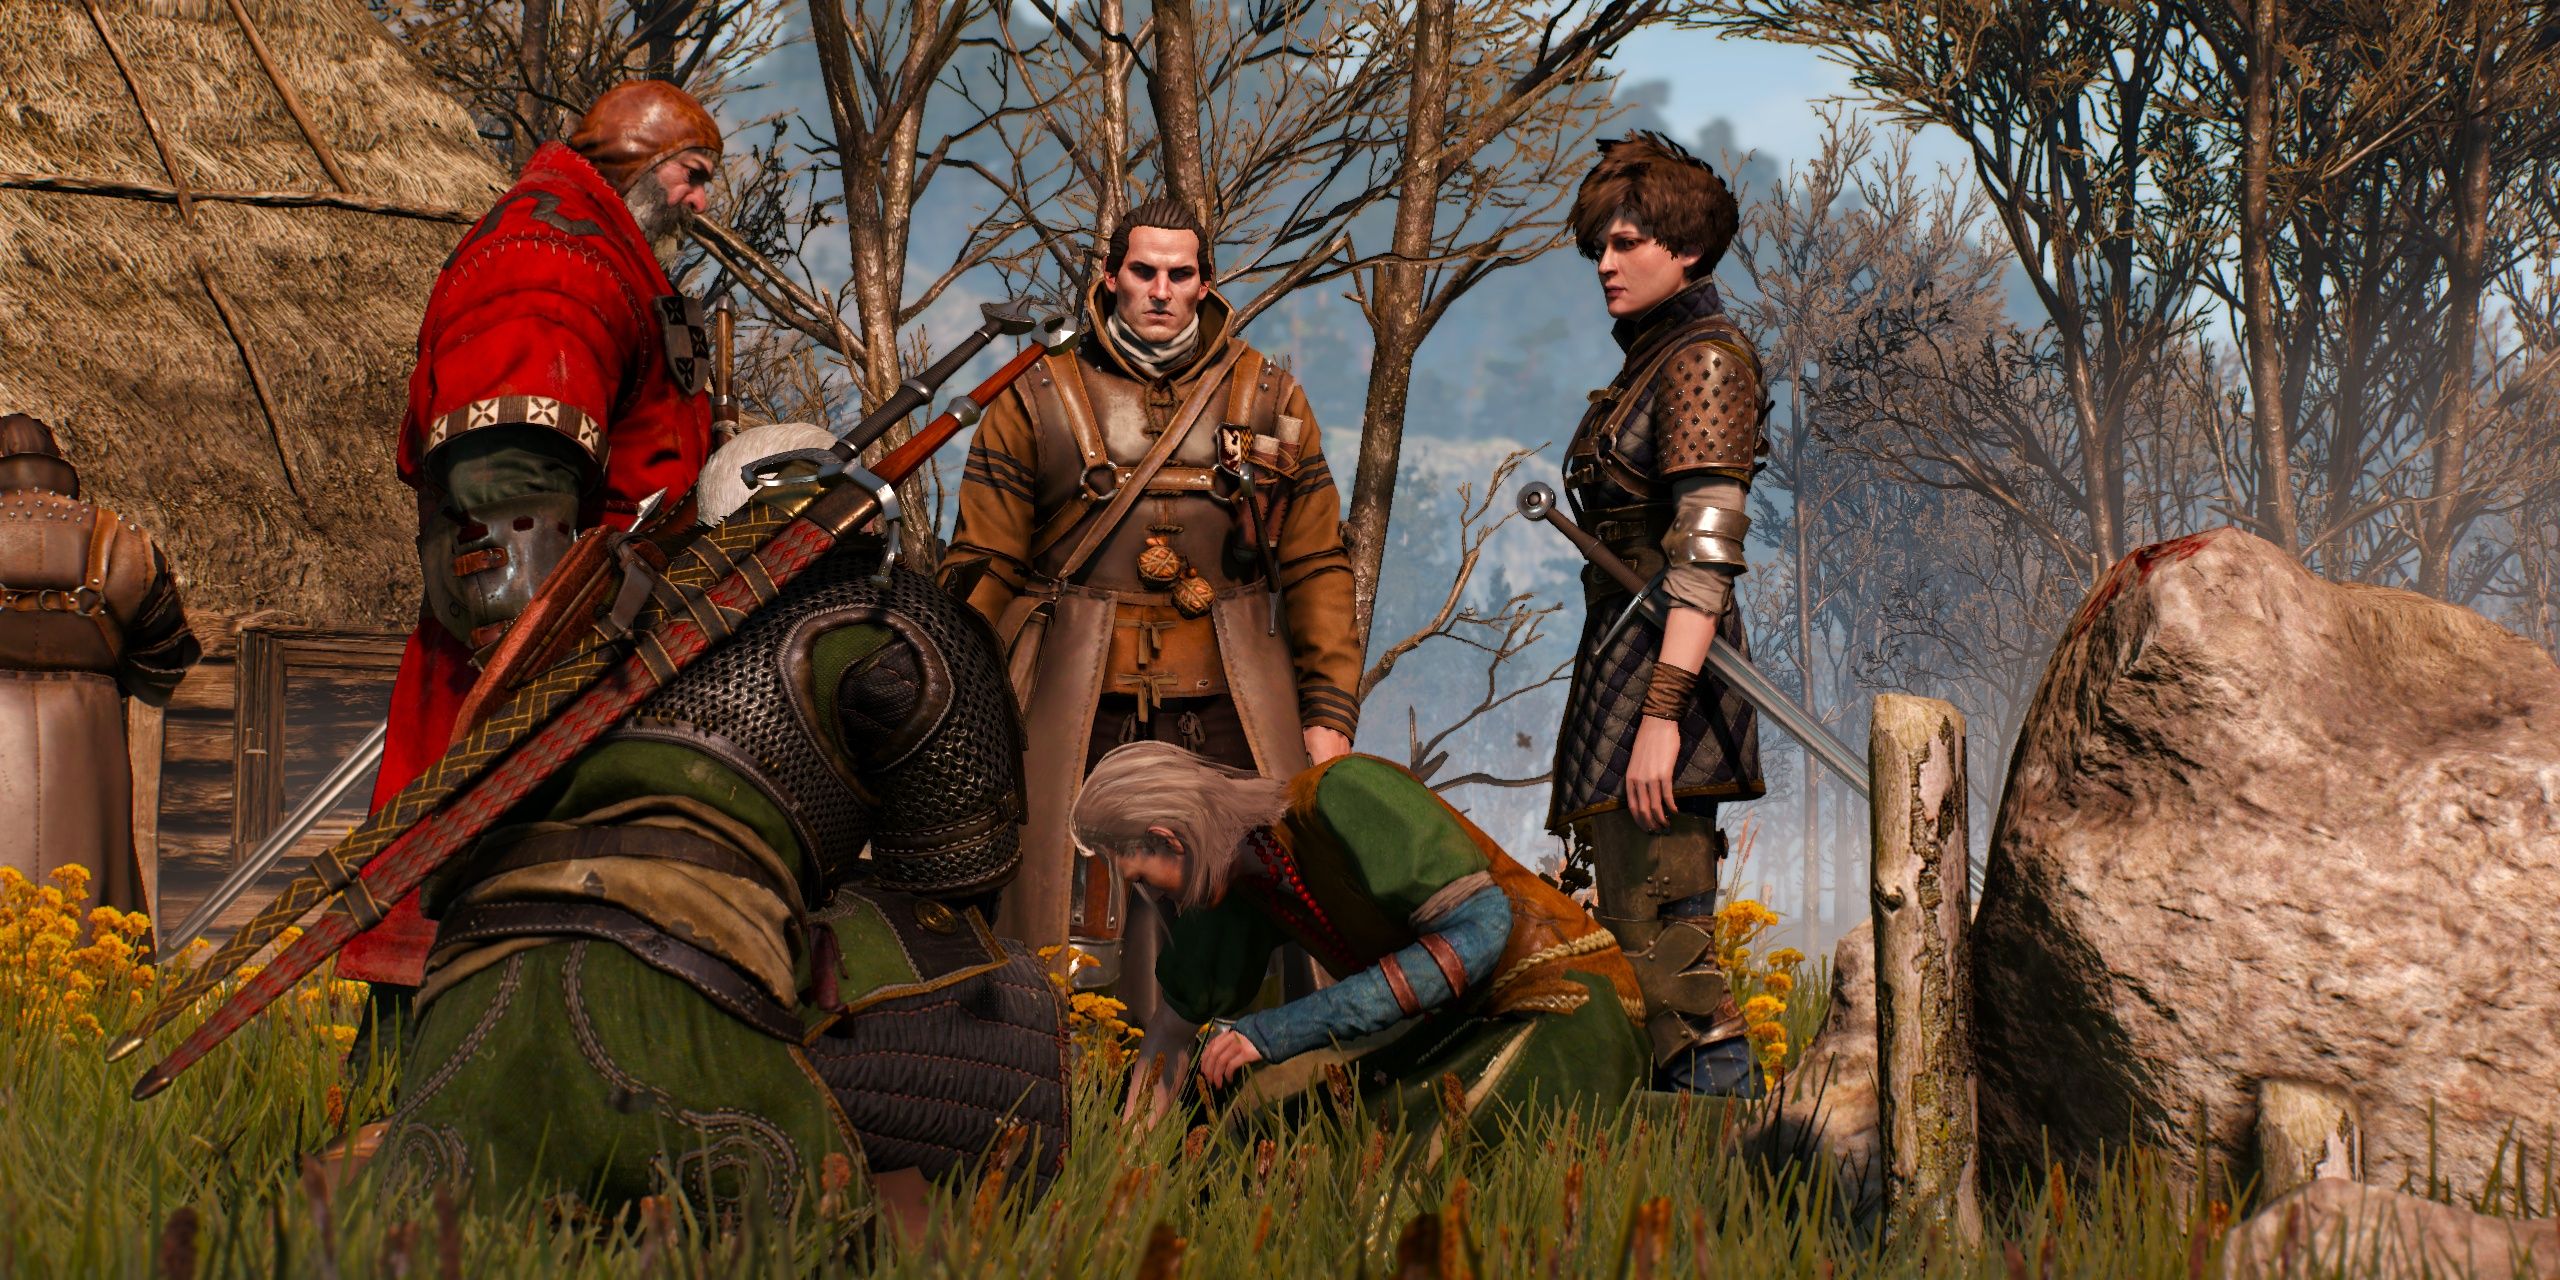 The Witcher 3 Geralt, Tamara and the Bloody Baron arrive to save Anna